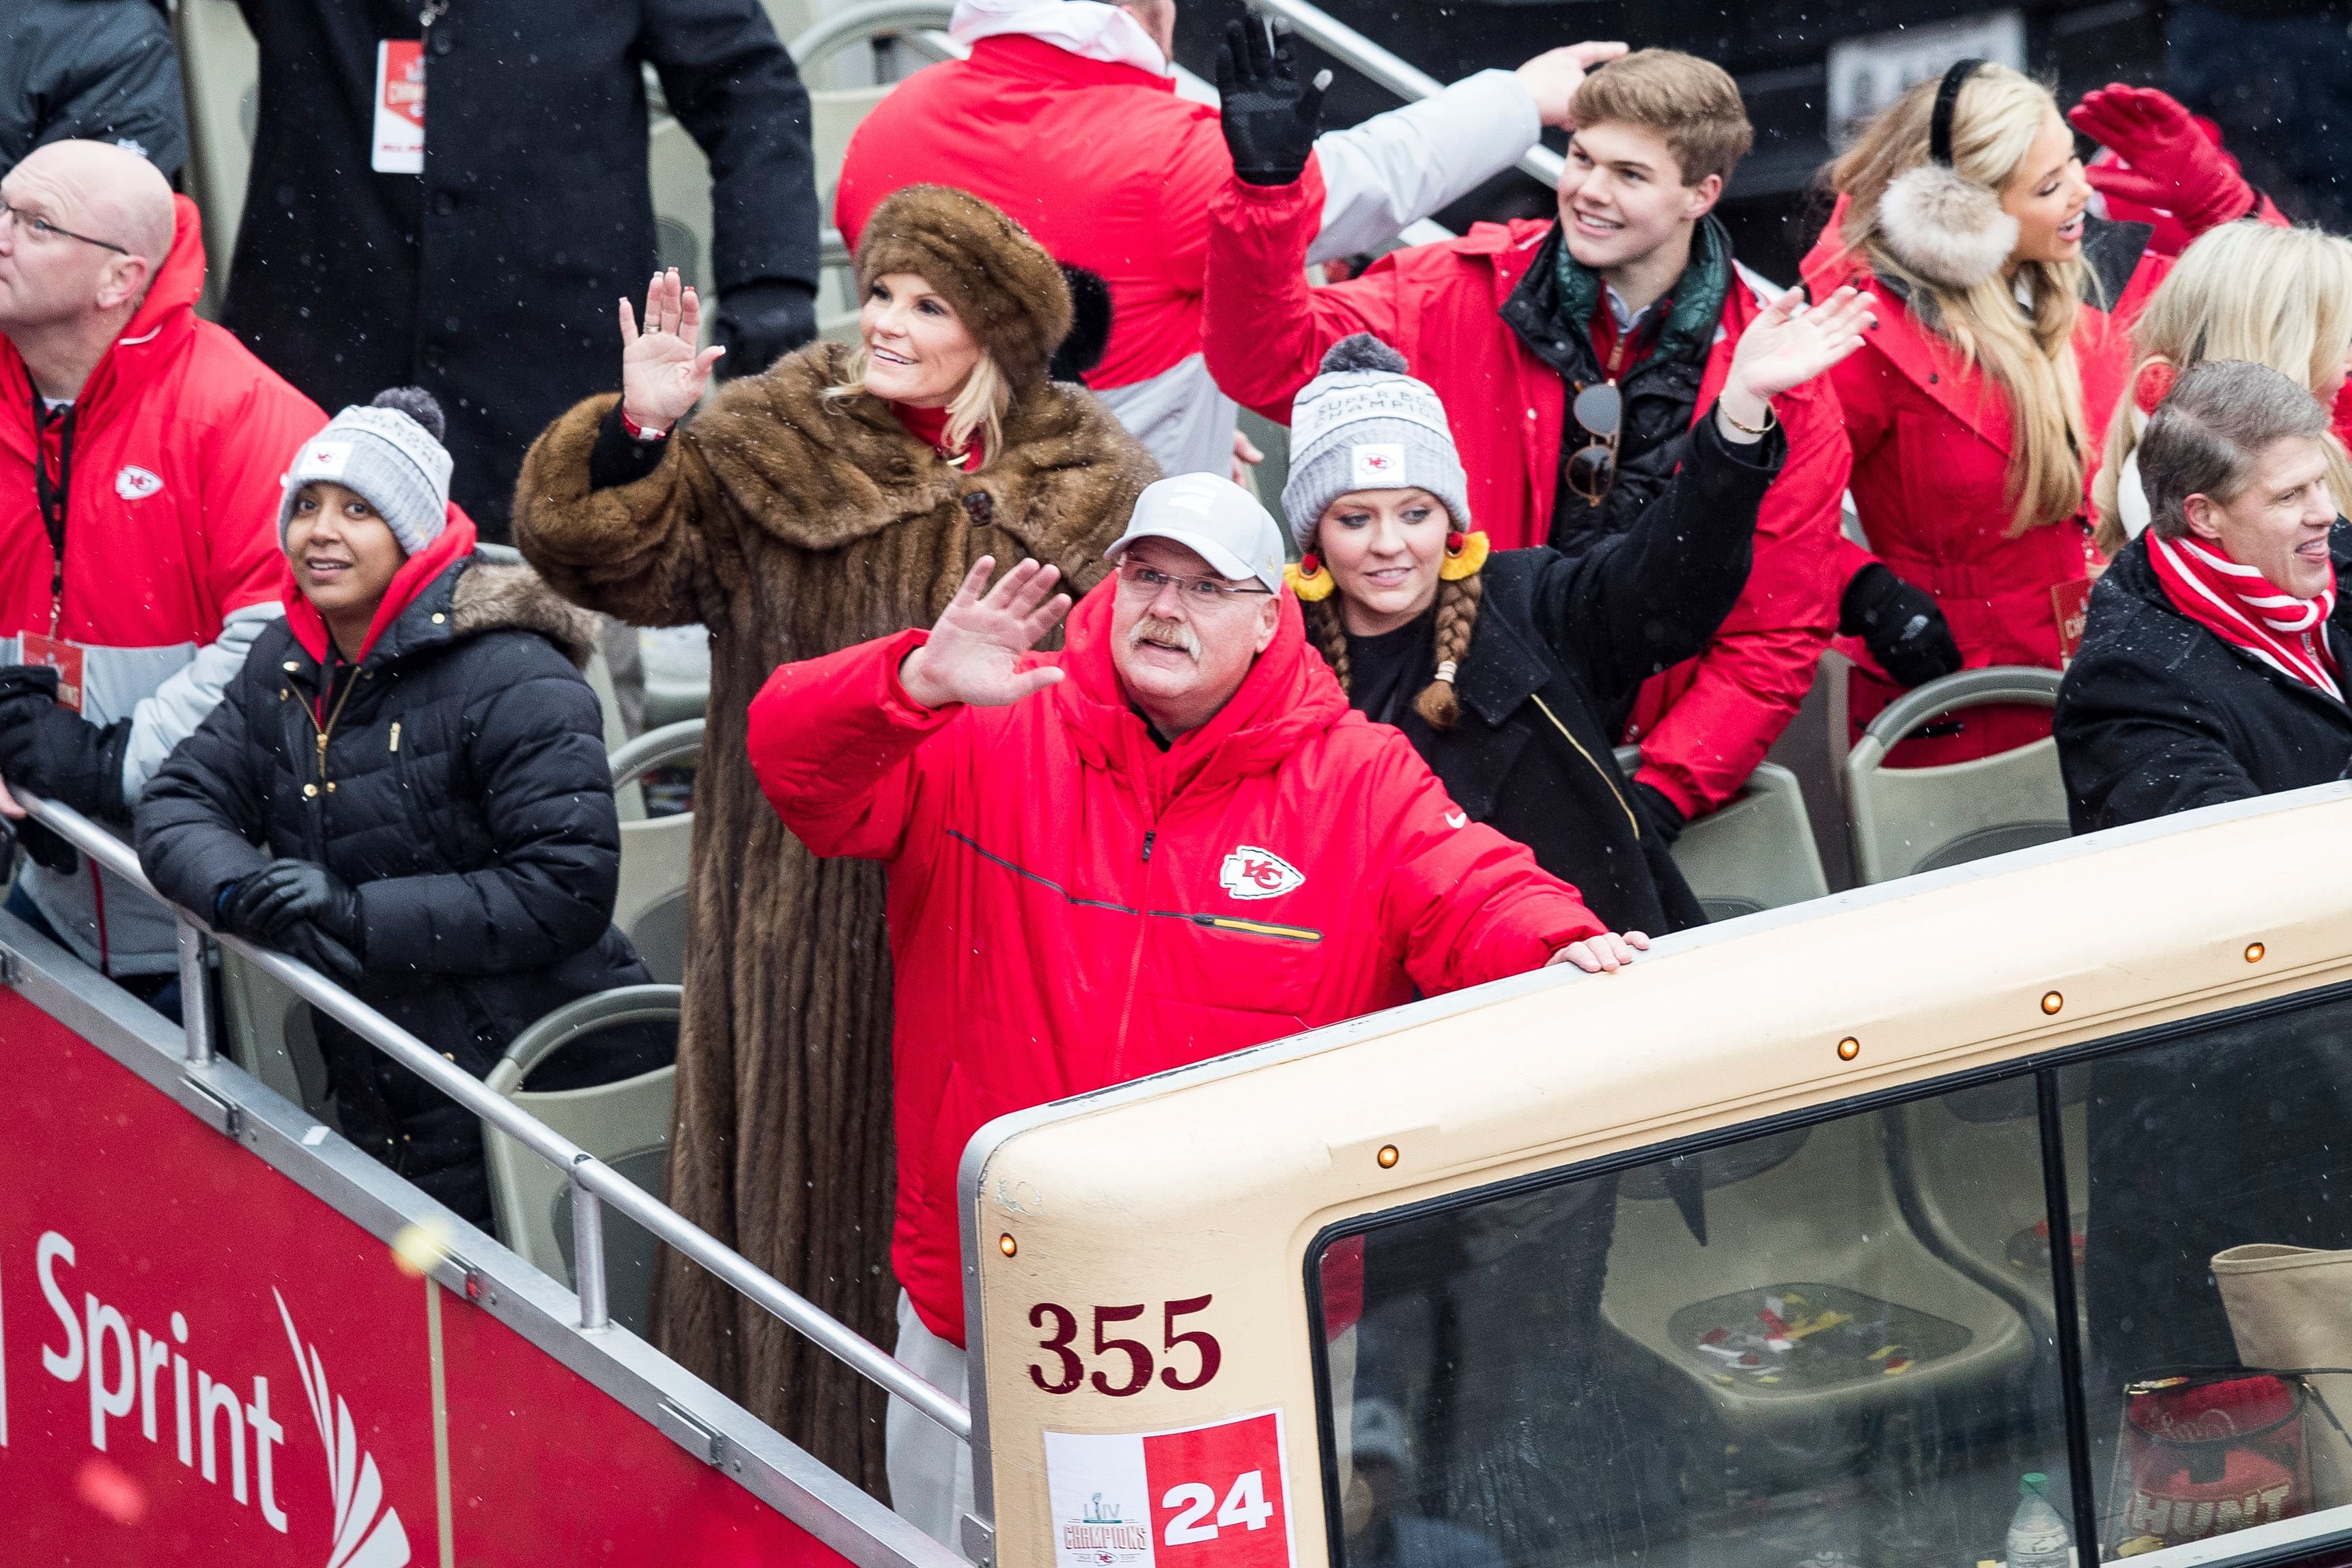 Andy Reid and Tammy Reid during the Kansas City Super Bowl Parade on February 5, 2020, in Kansas City, Missouri. | Source: Getty Images